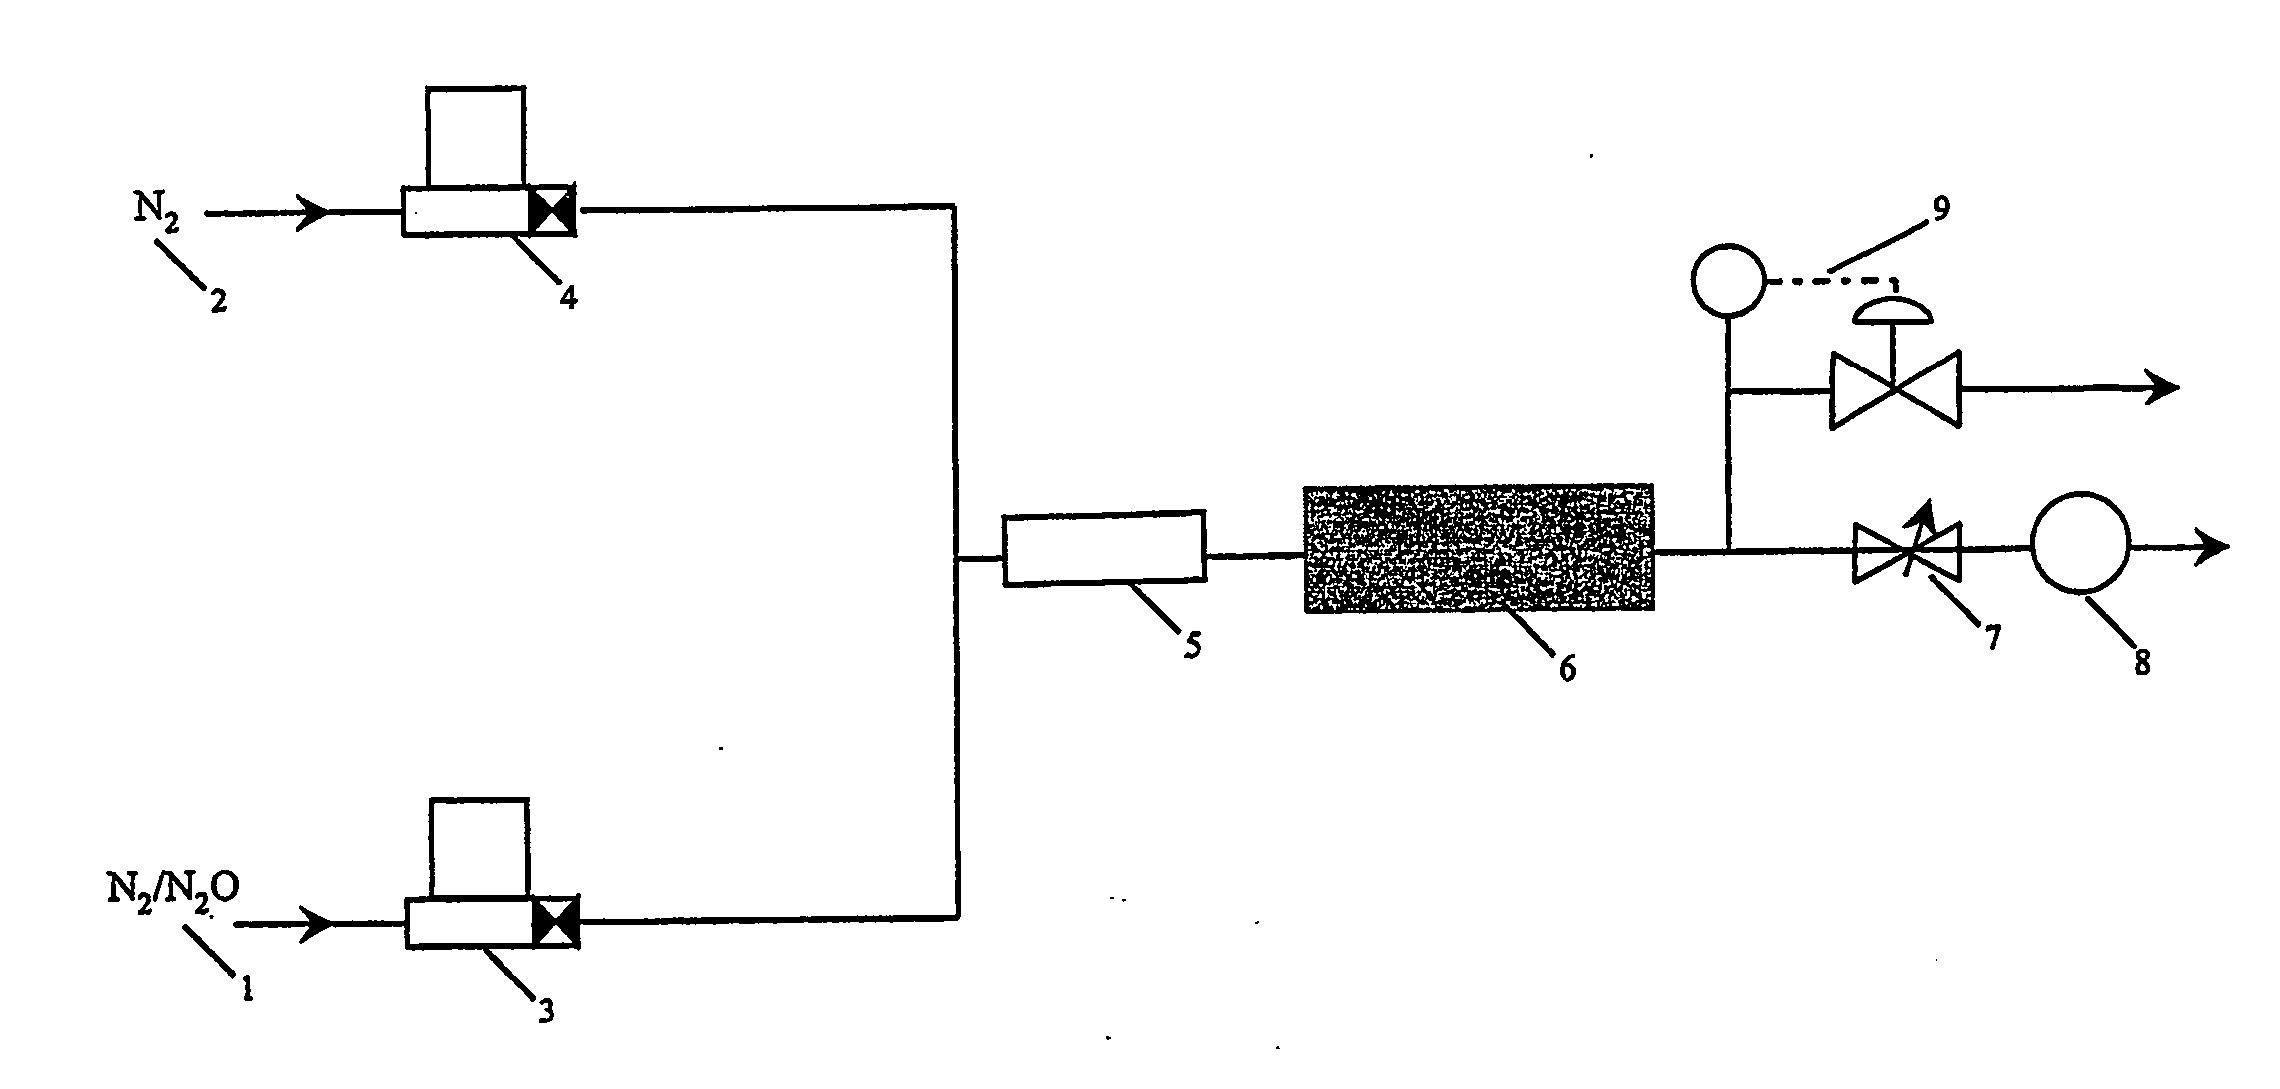 Method and apparatus for gas purification